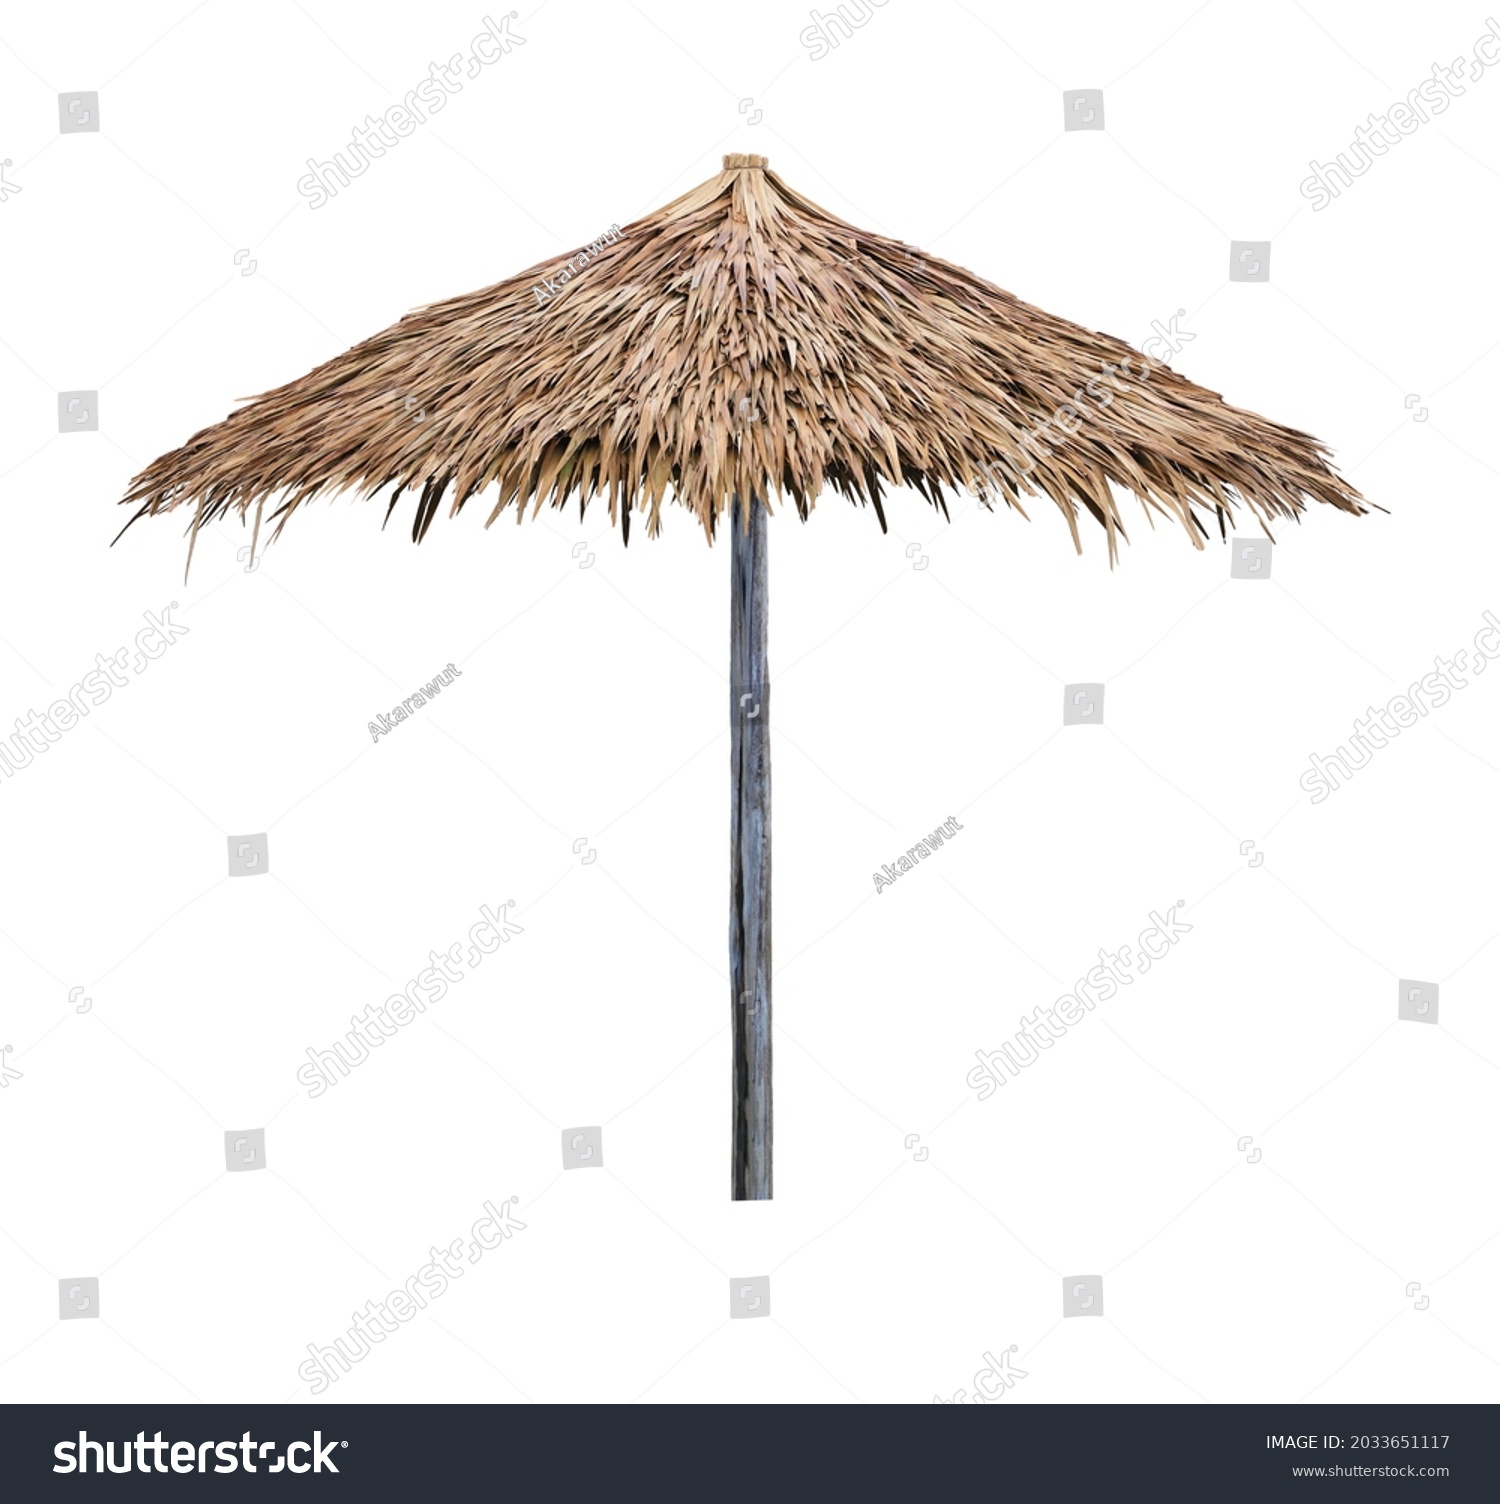 Single beach umbrella parasol made of coconut leaf isolated on white background with clipping path #2033651117